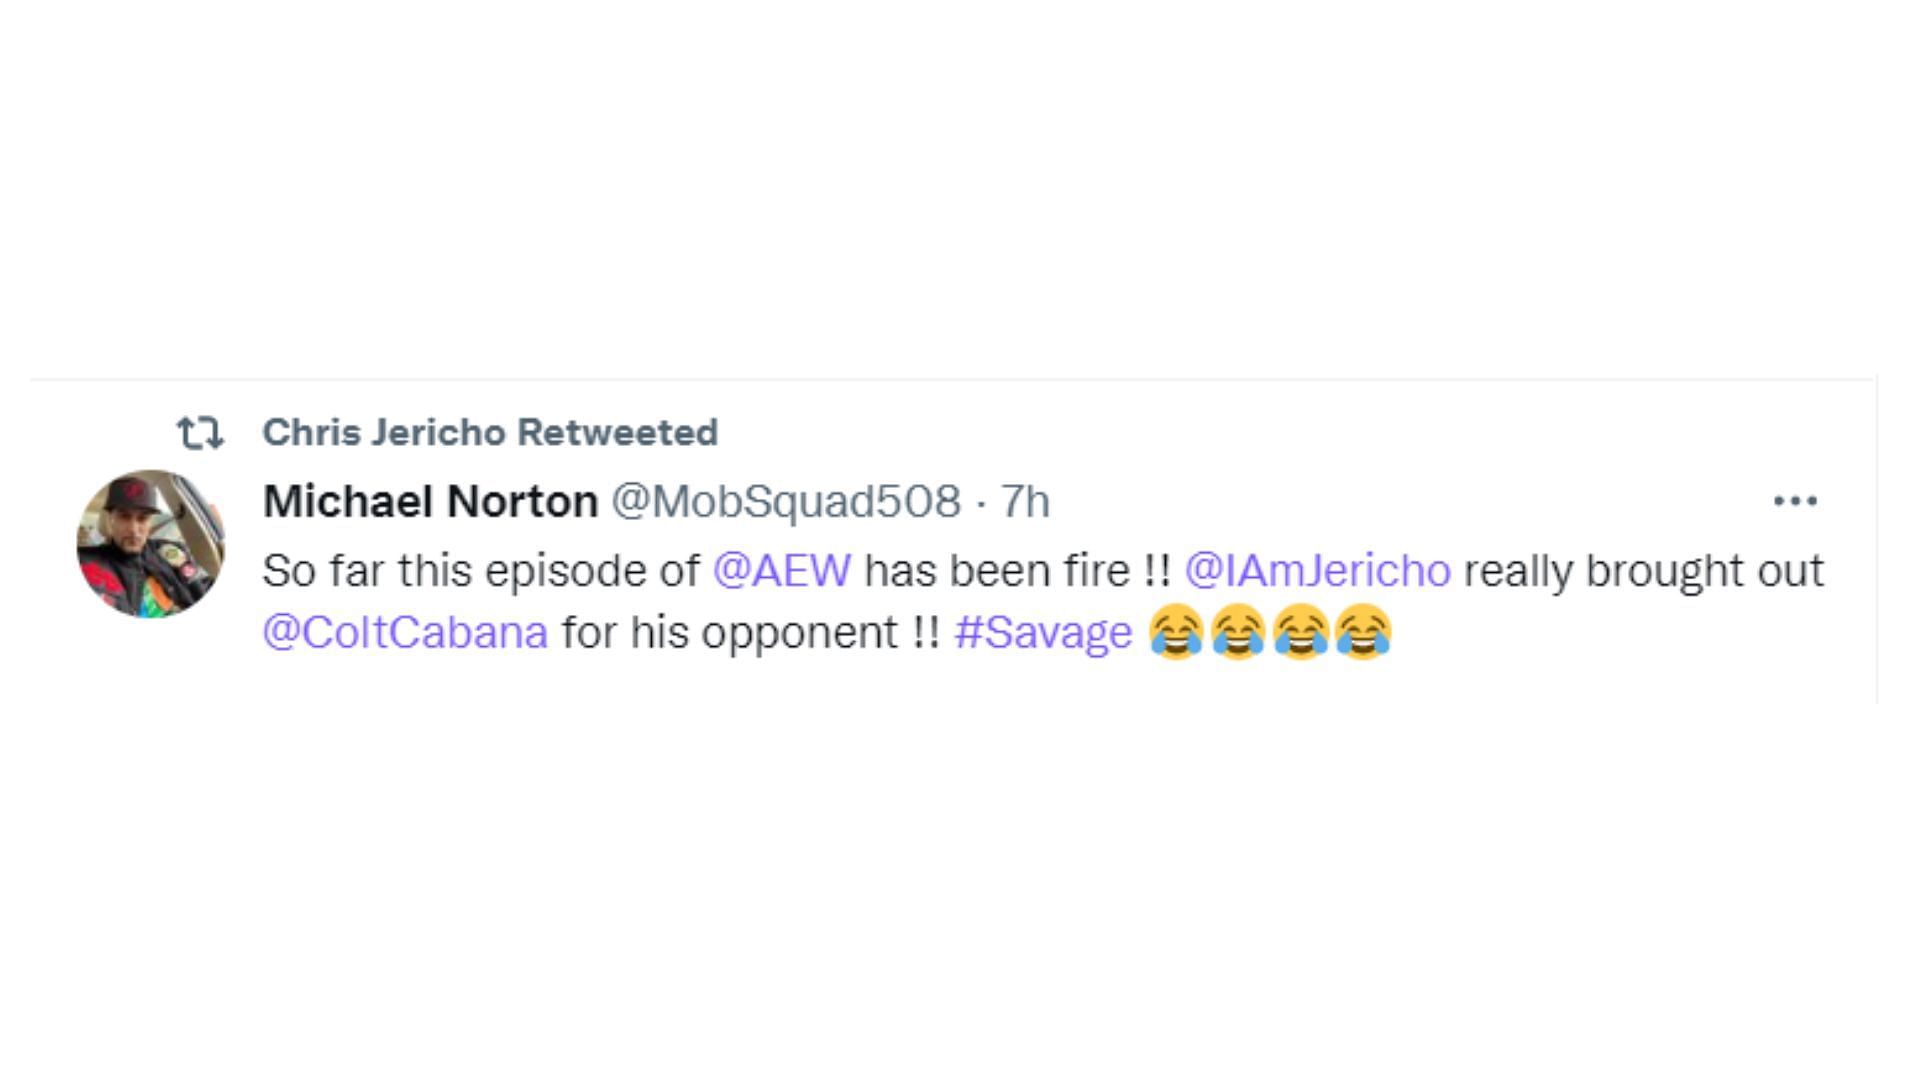 Chris Jericho retweeted an interesting post this week